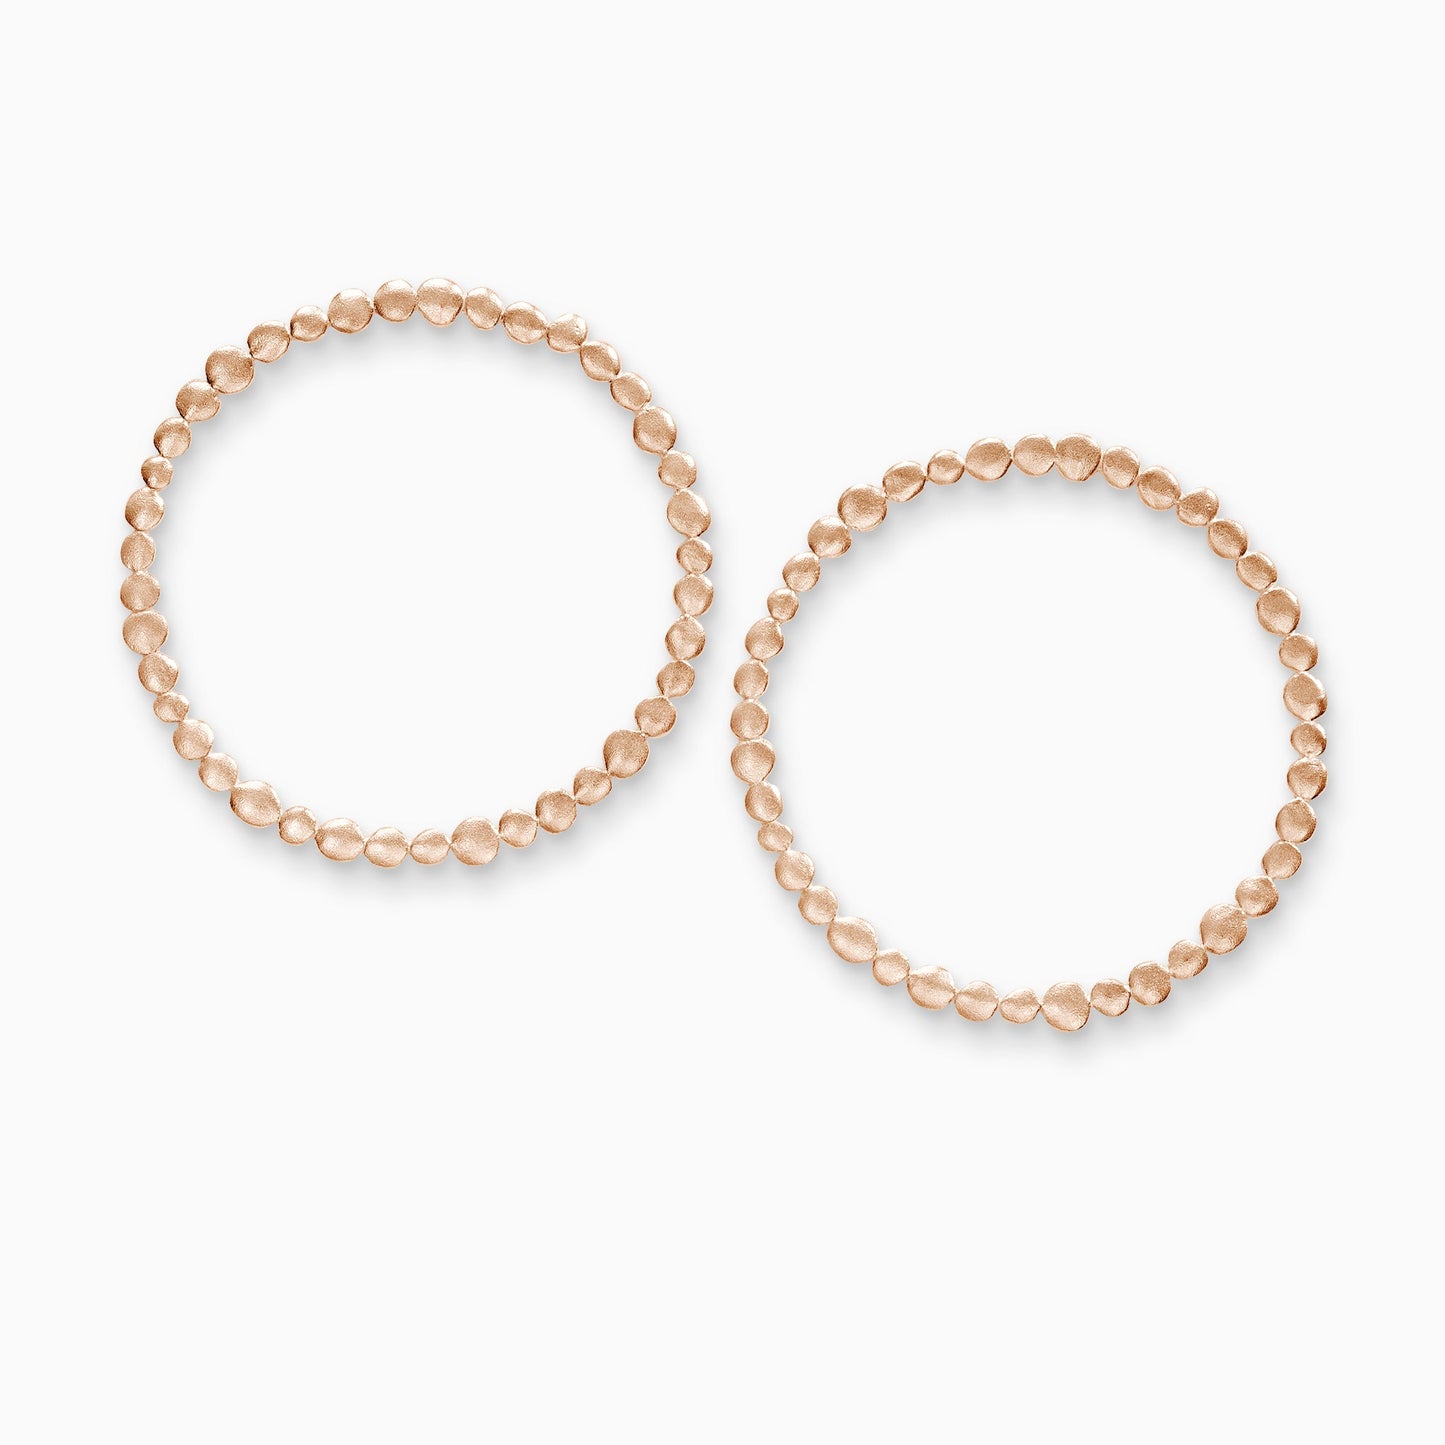 A pair of 18ct Fairtrade rose gold earrings made of tiny undulating textured and connected dots forming a closed circle. 60mm outside diameter 